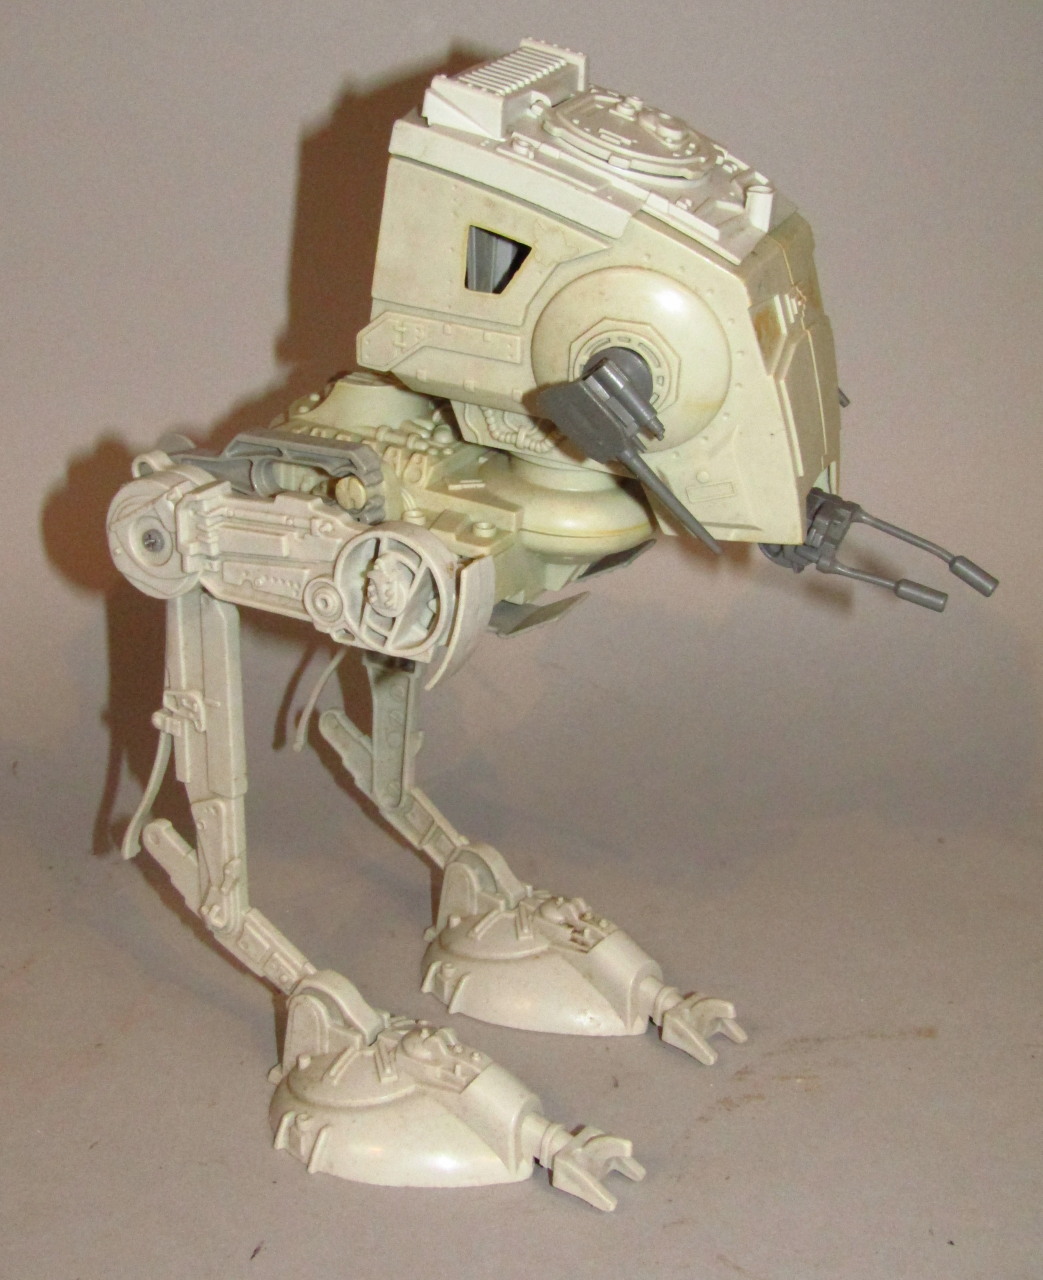 A Lucas film limited Star Wars 1982 edition AT-ST, with articulated legs and other ships and - Image 4 of 7